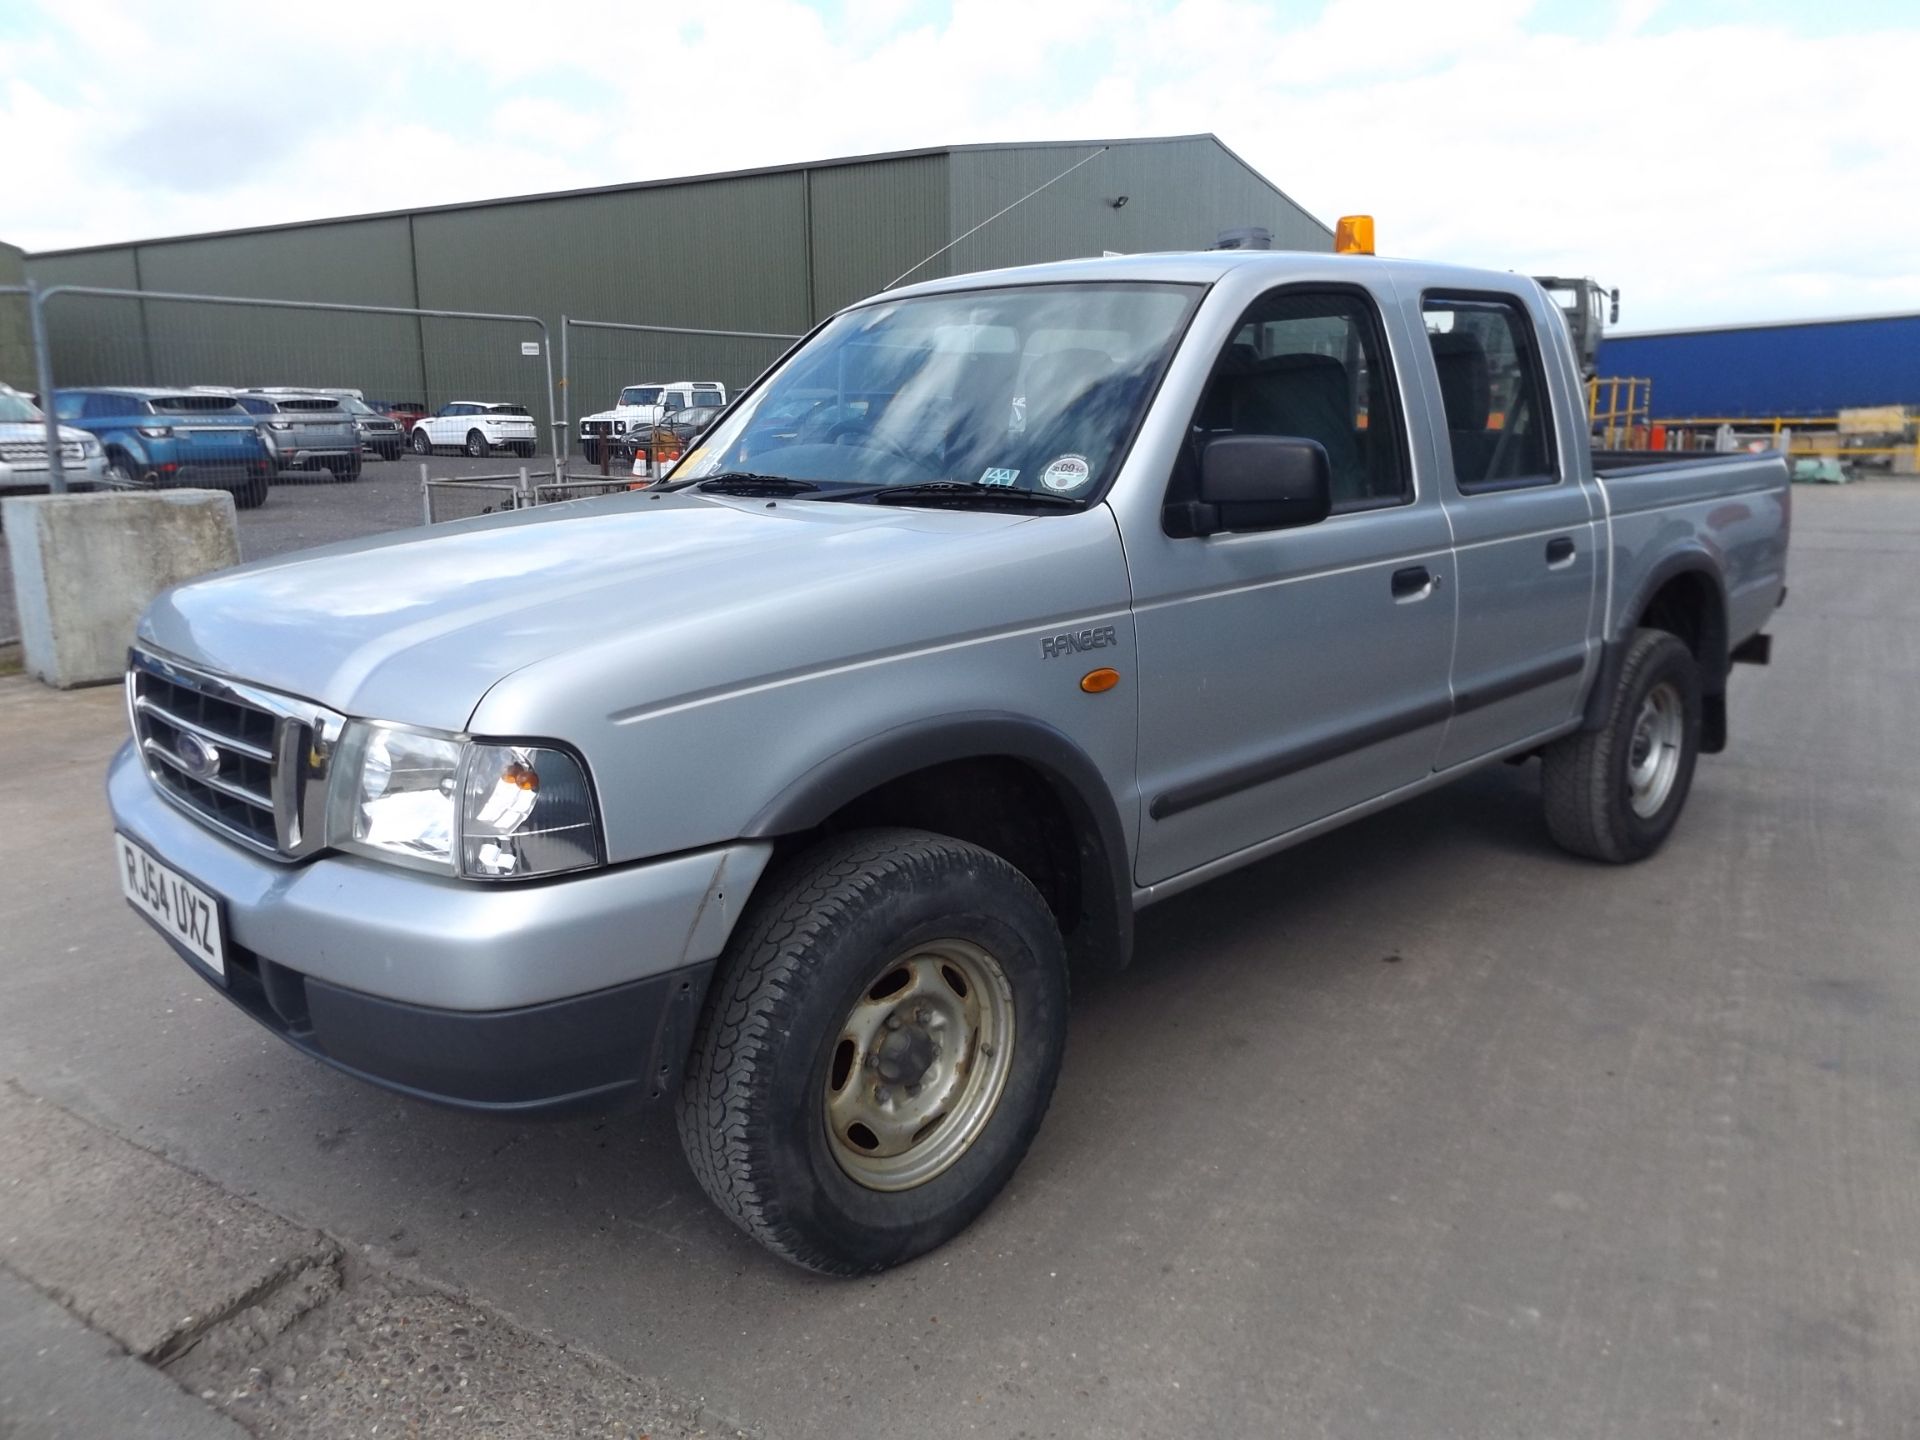 Ford Ranger Double cab pick up - Image 3 of 15